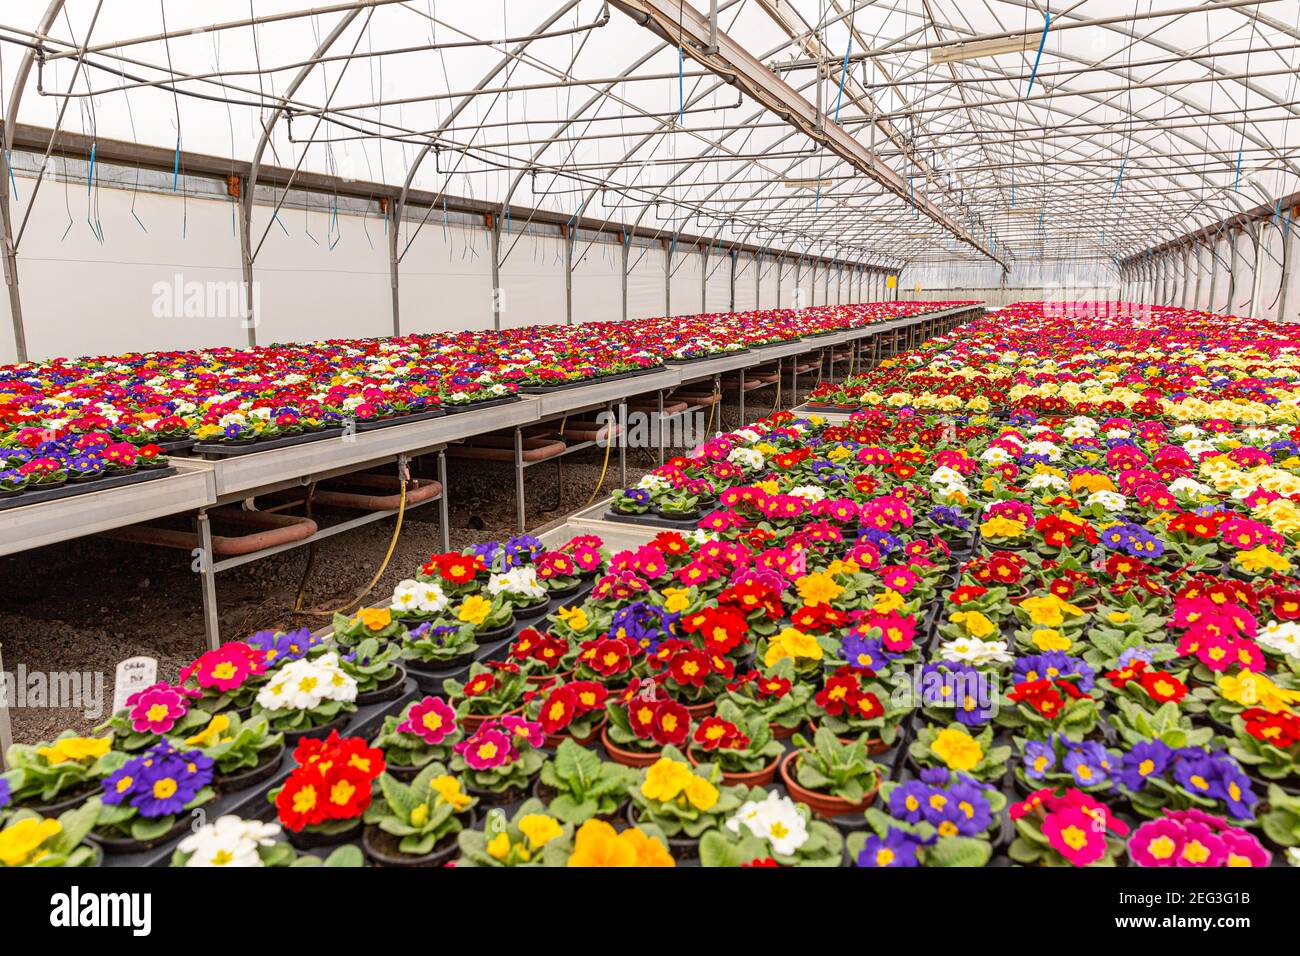 Colorful small potted flowers Primula Auricula blooming in the rows in greenhouse. Stock Photo